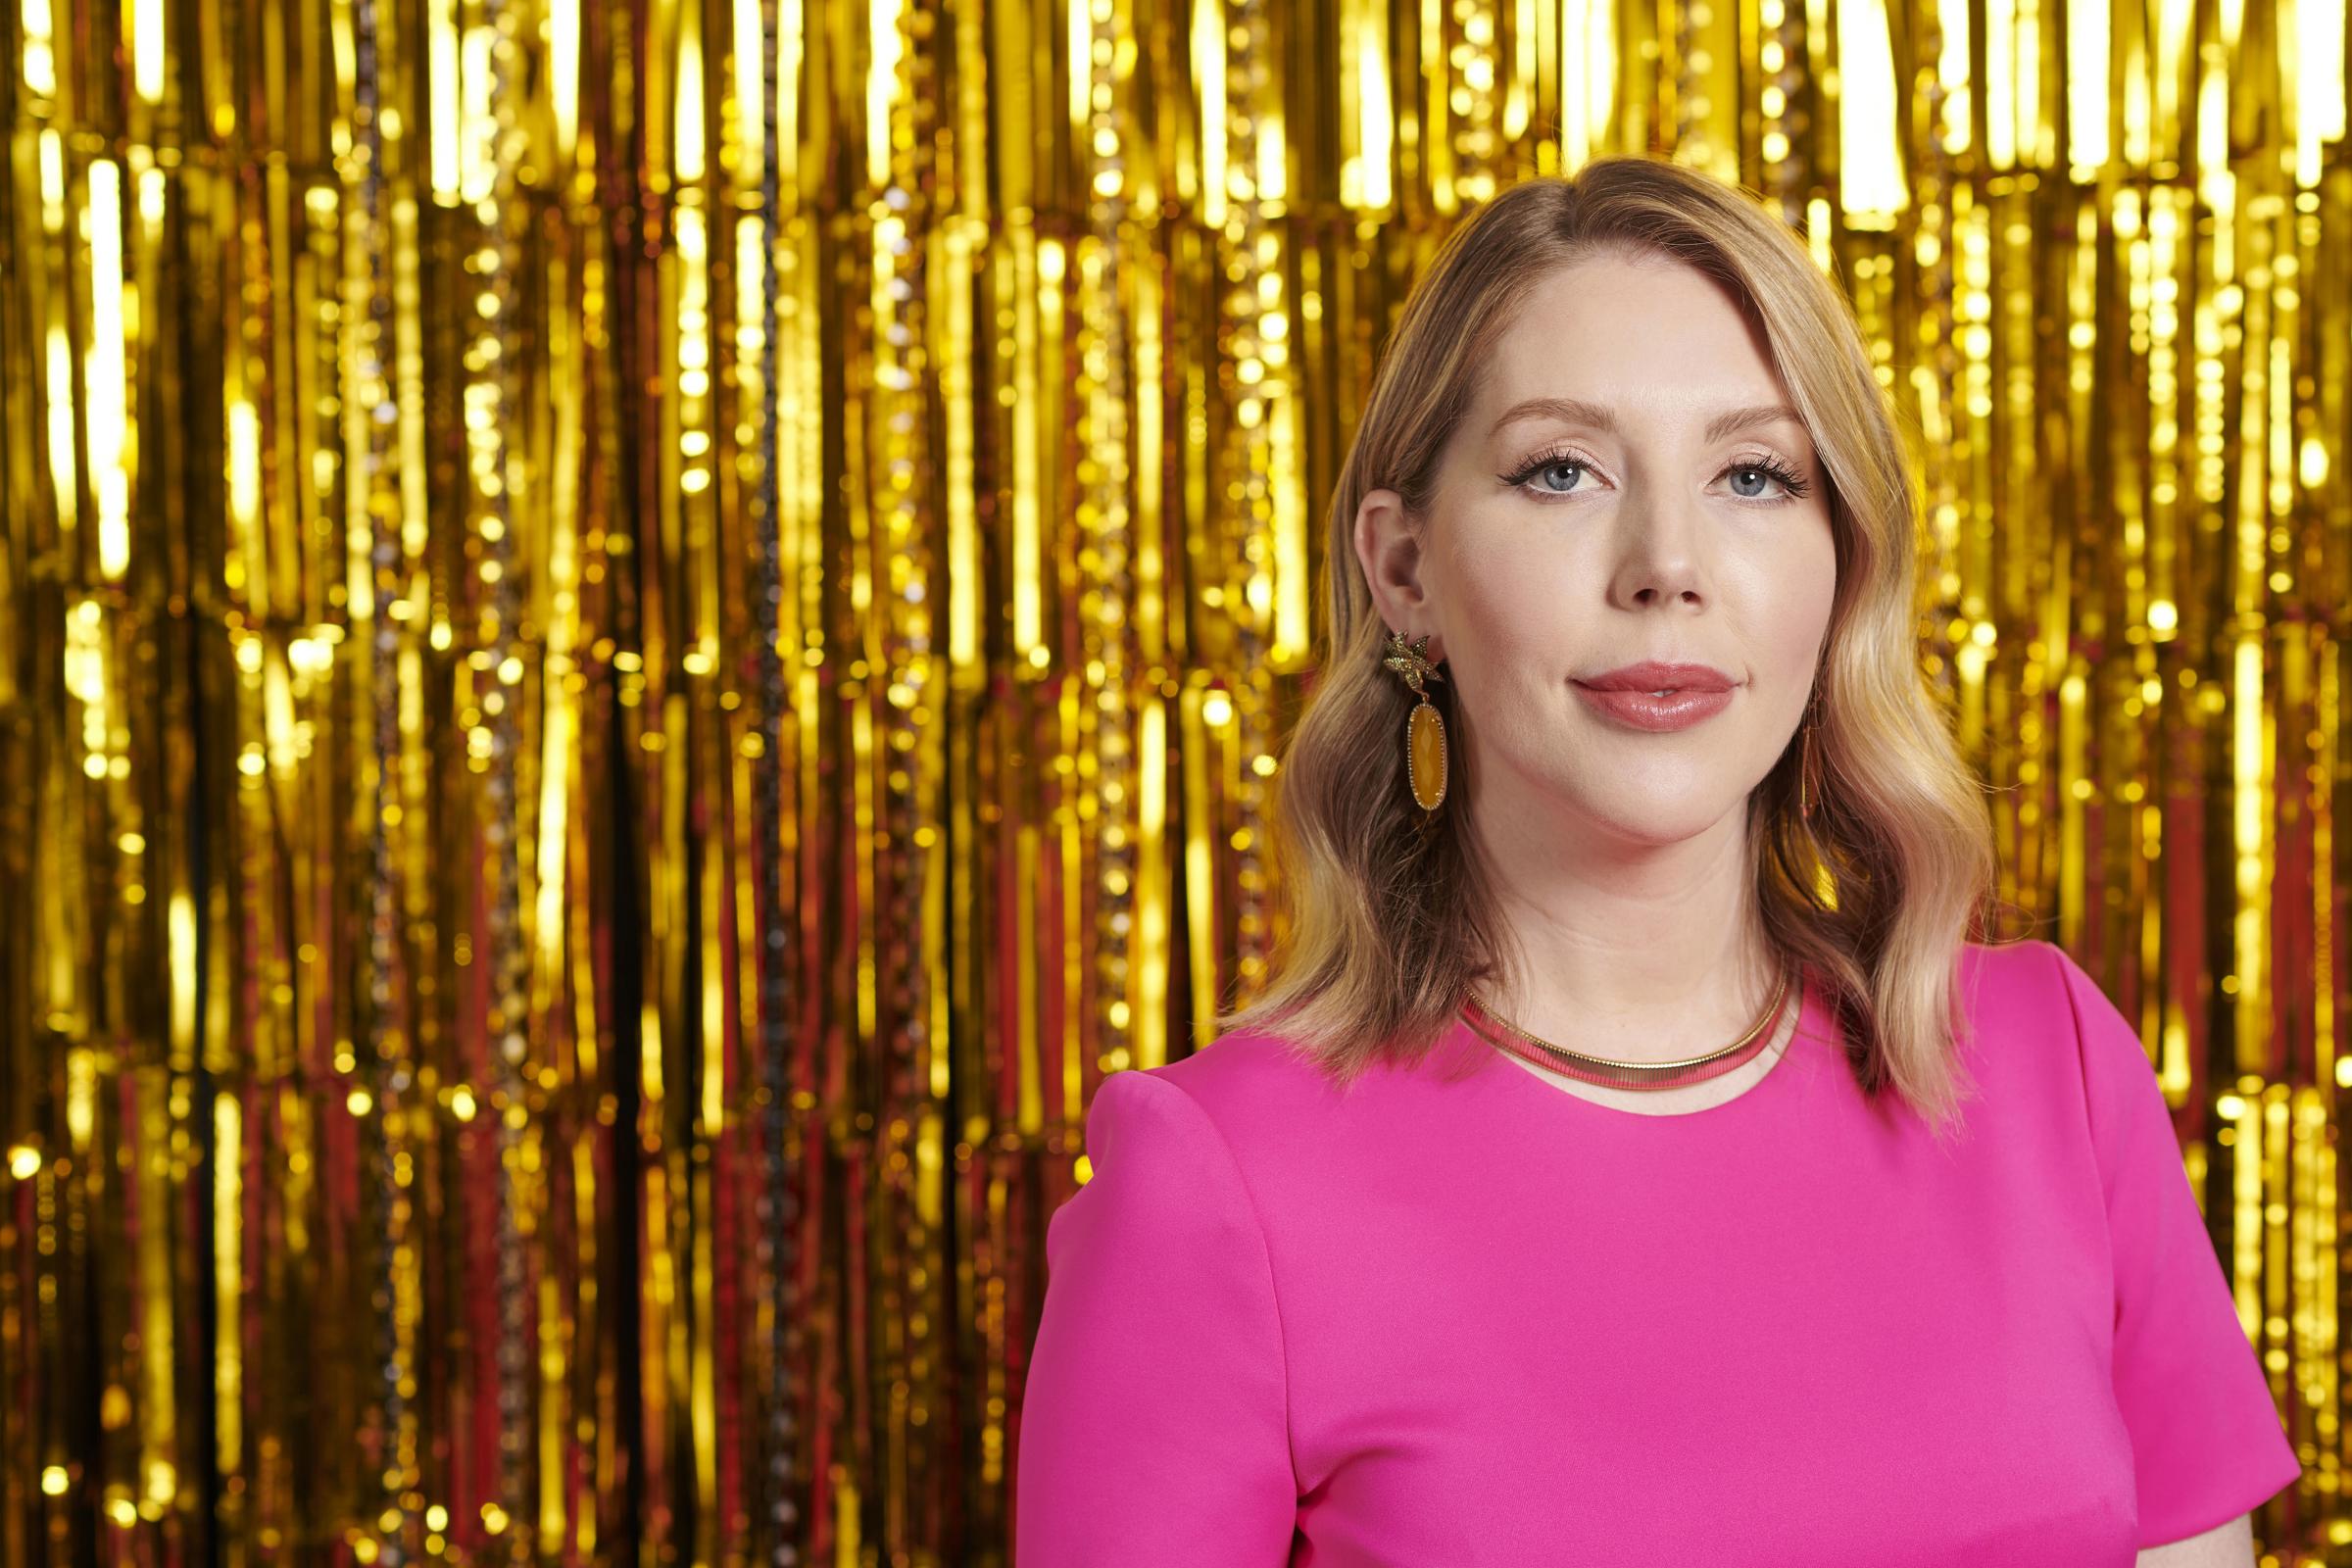 All That Glitters: Britains Next Jewellery Star with Katherine Ryan